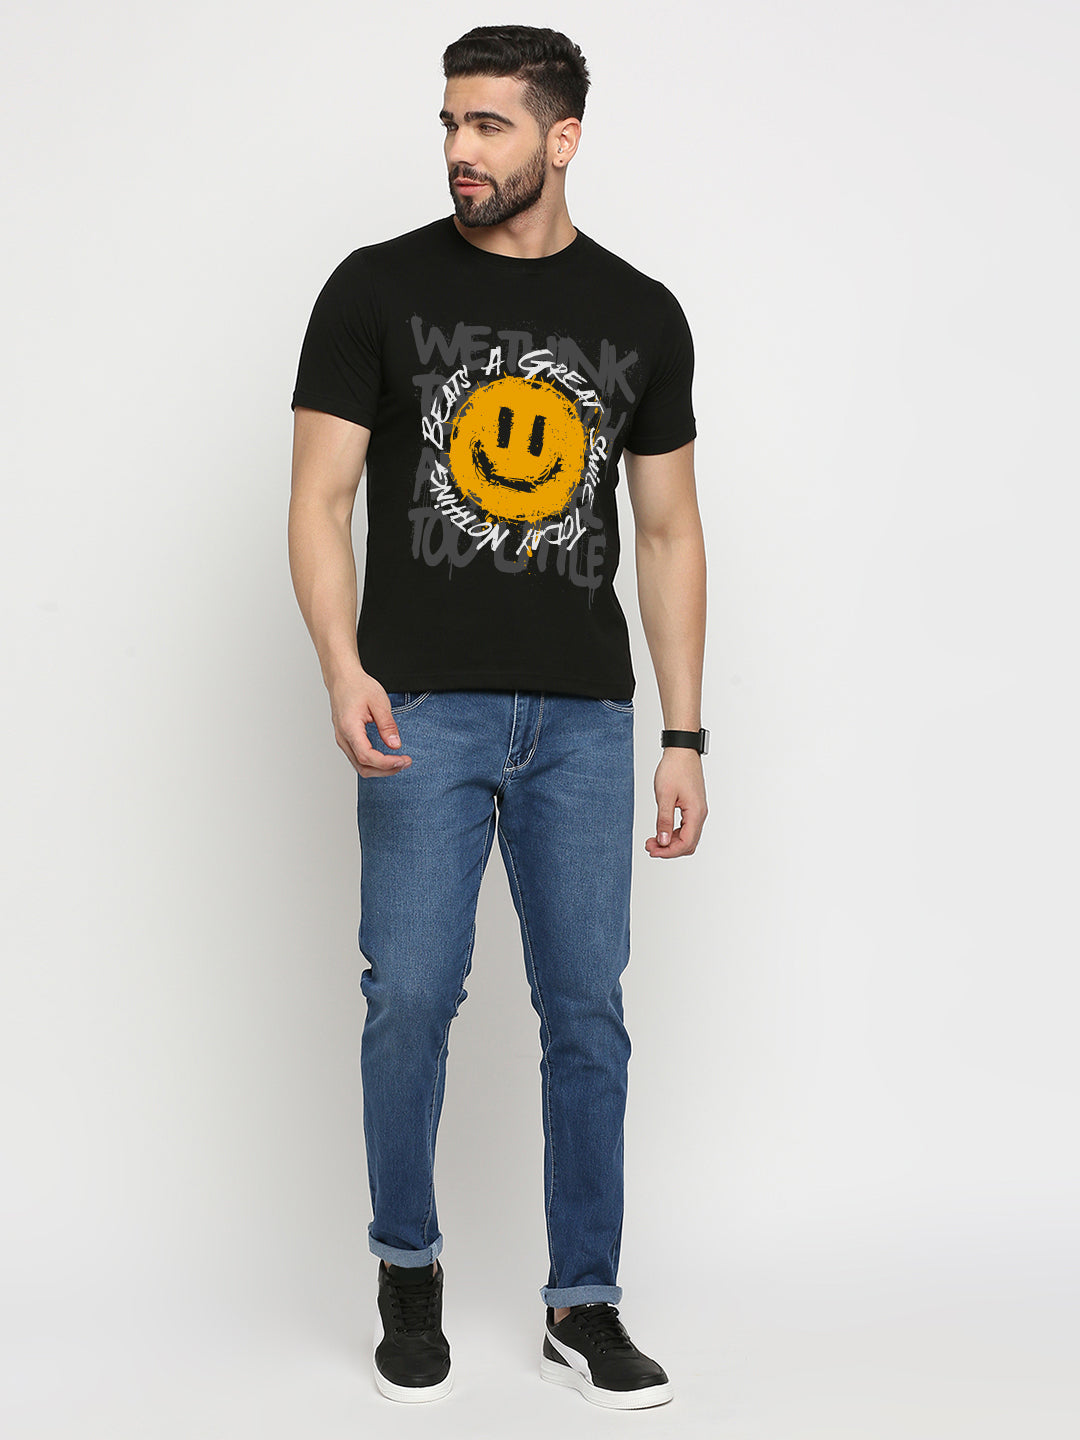 Nothing Beats A Good Smile Today T-Shirt